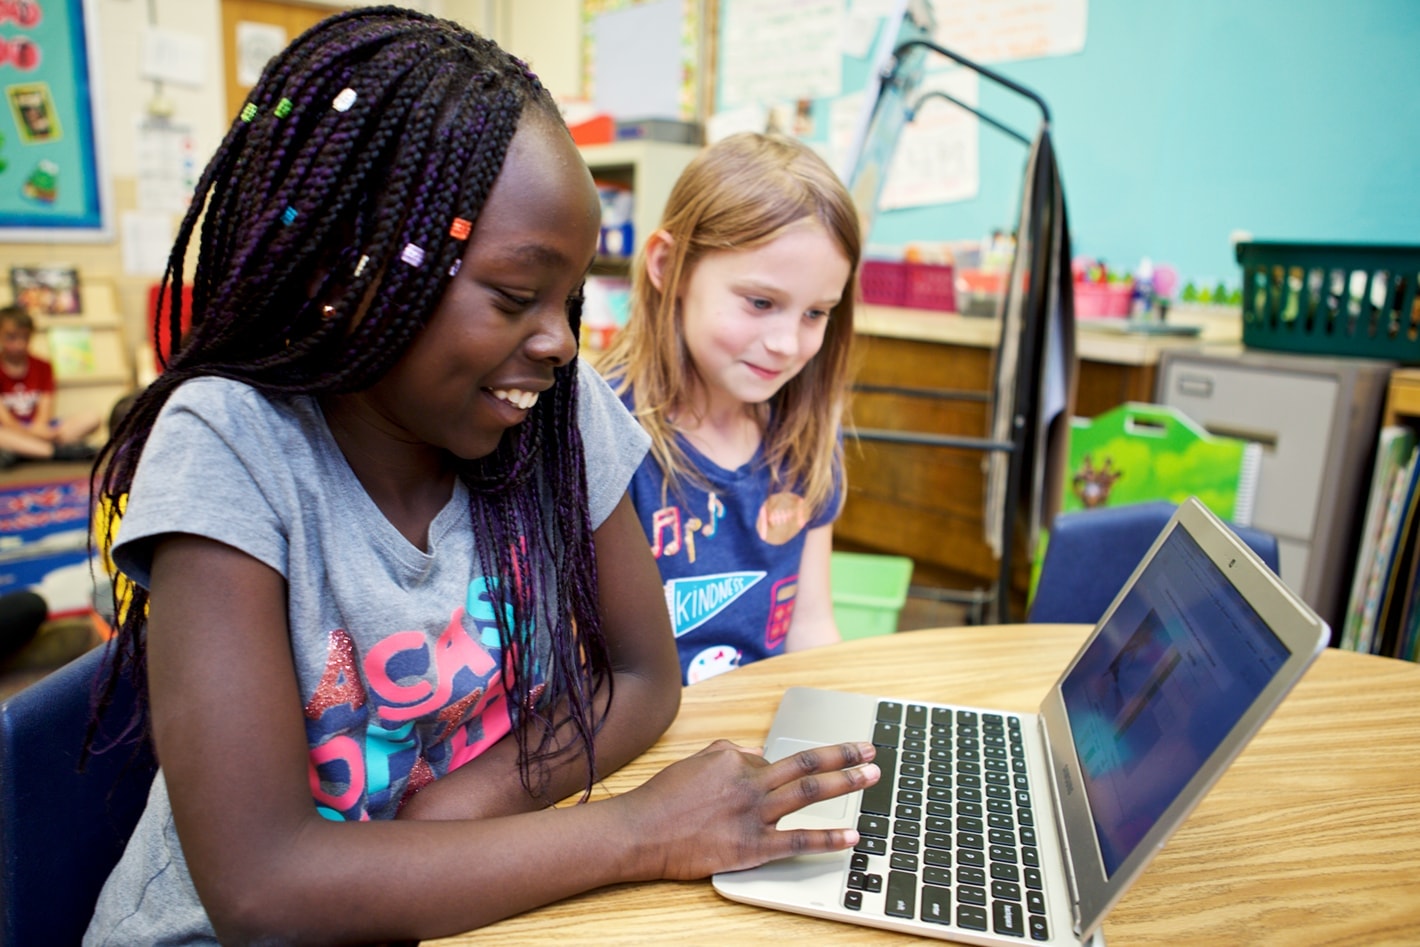 Two young girls, one black and one caucasian, smiling and using a laptop together in a colorful classroom setting.